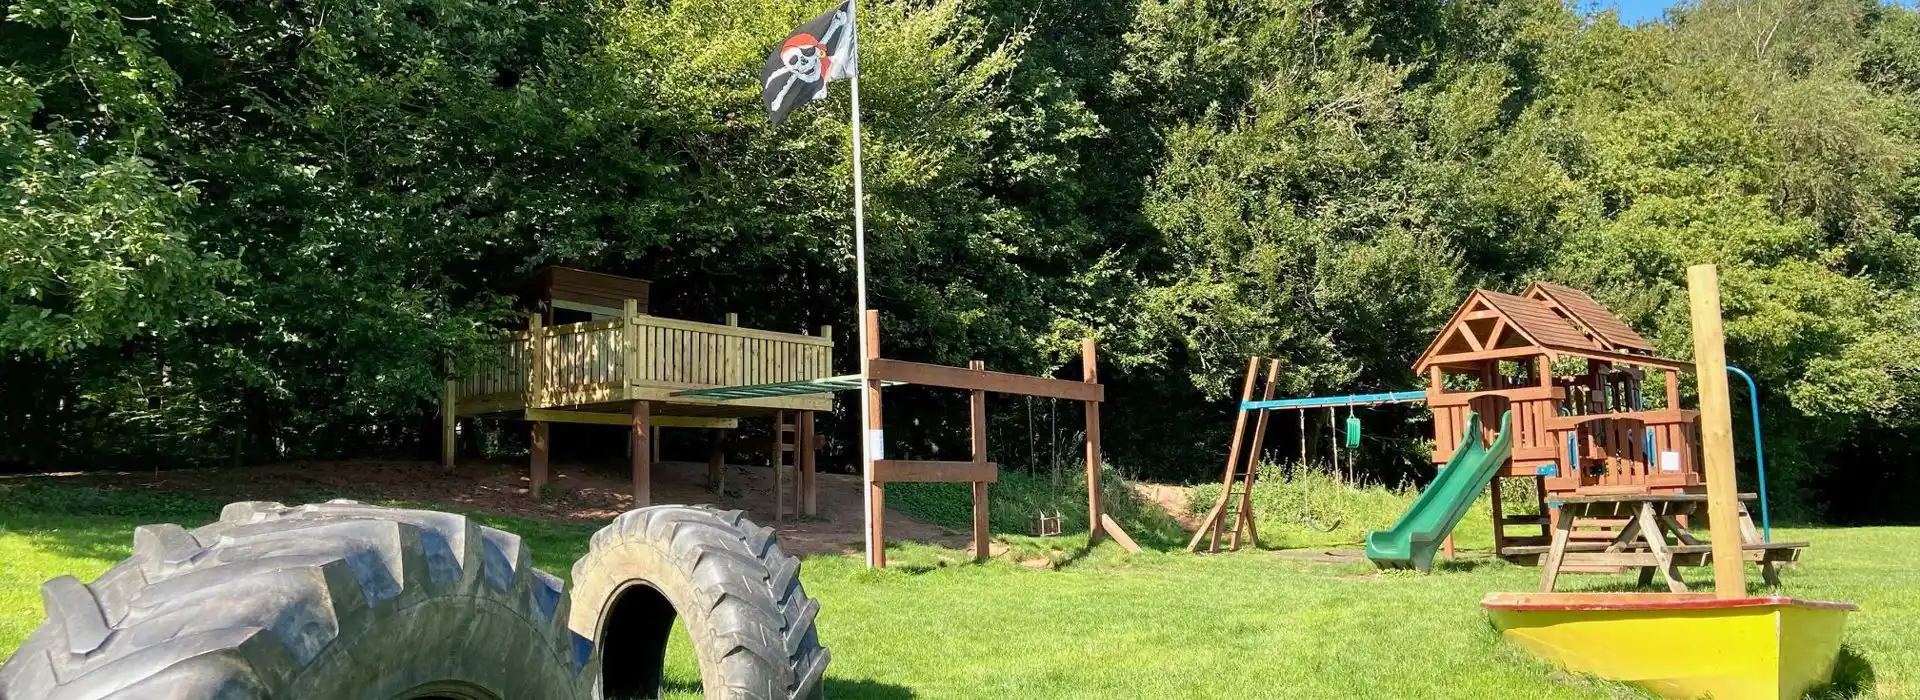 Family campsites in the West Midlands